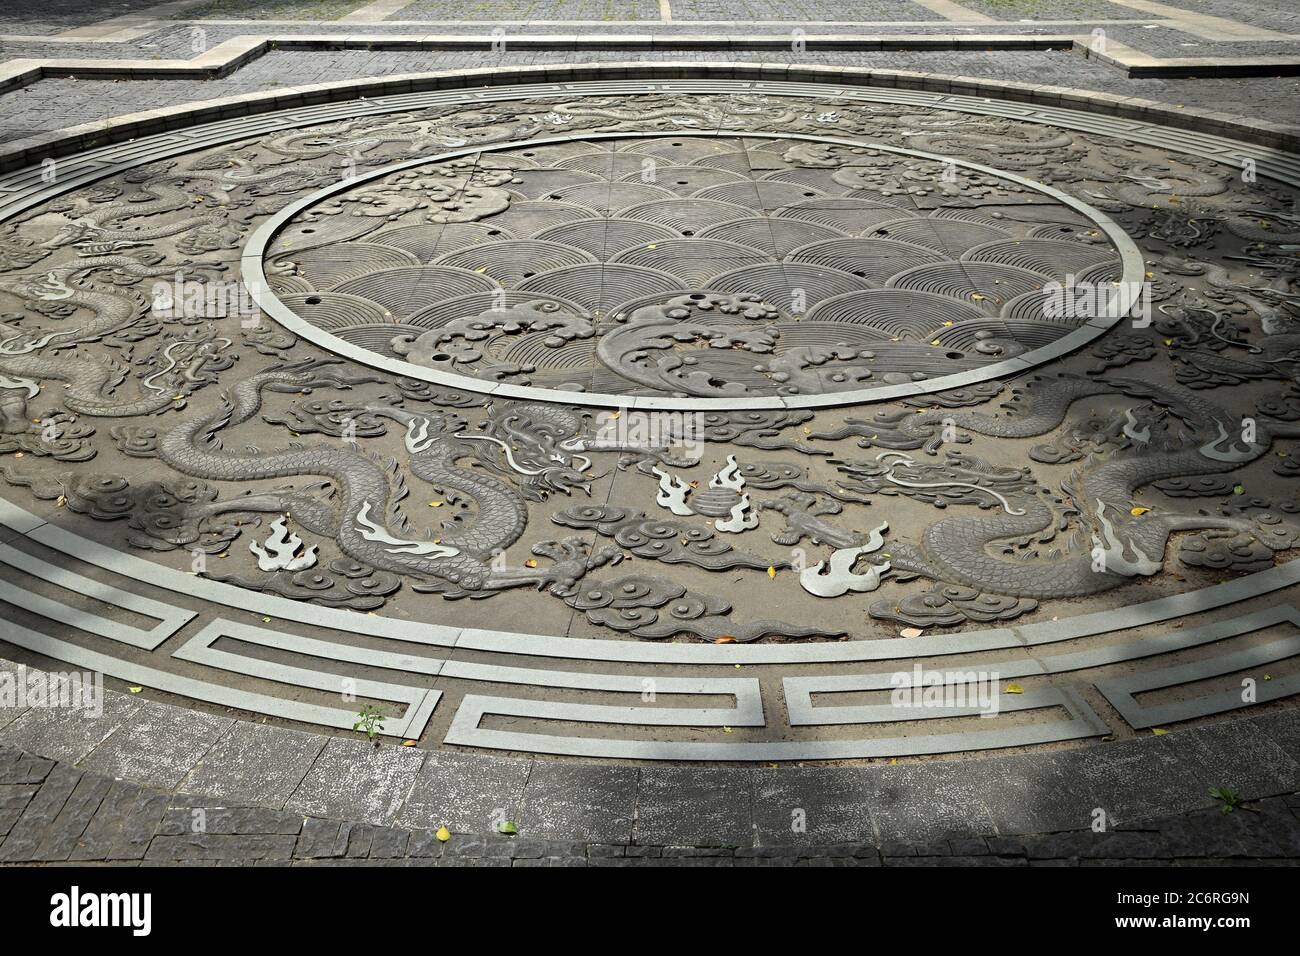 The Nine dragons round stone carving on pavement. Stock Photo